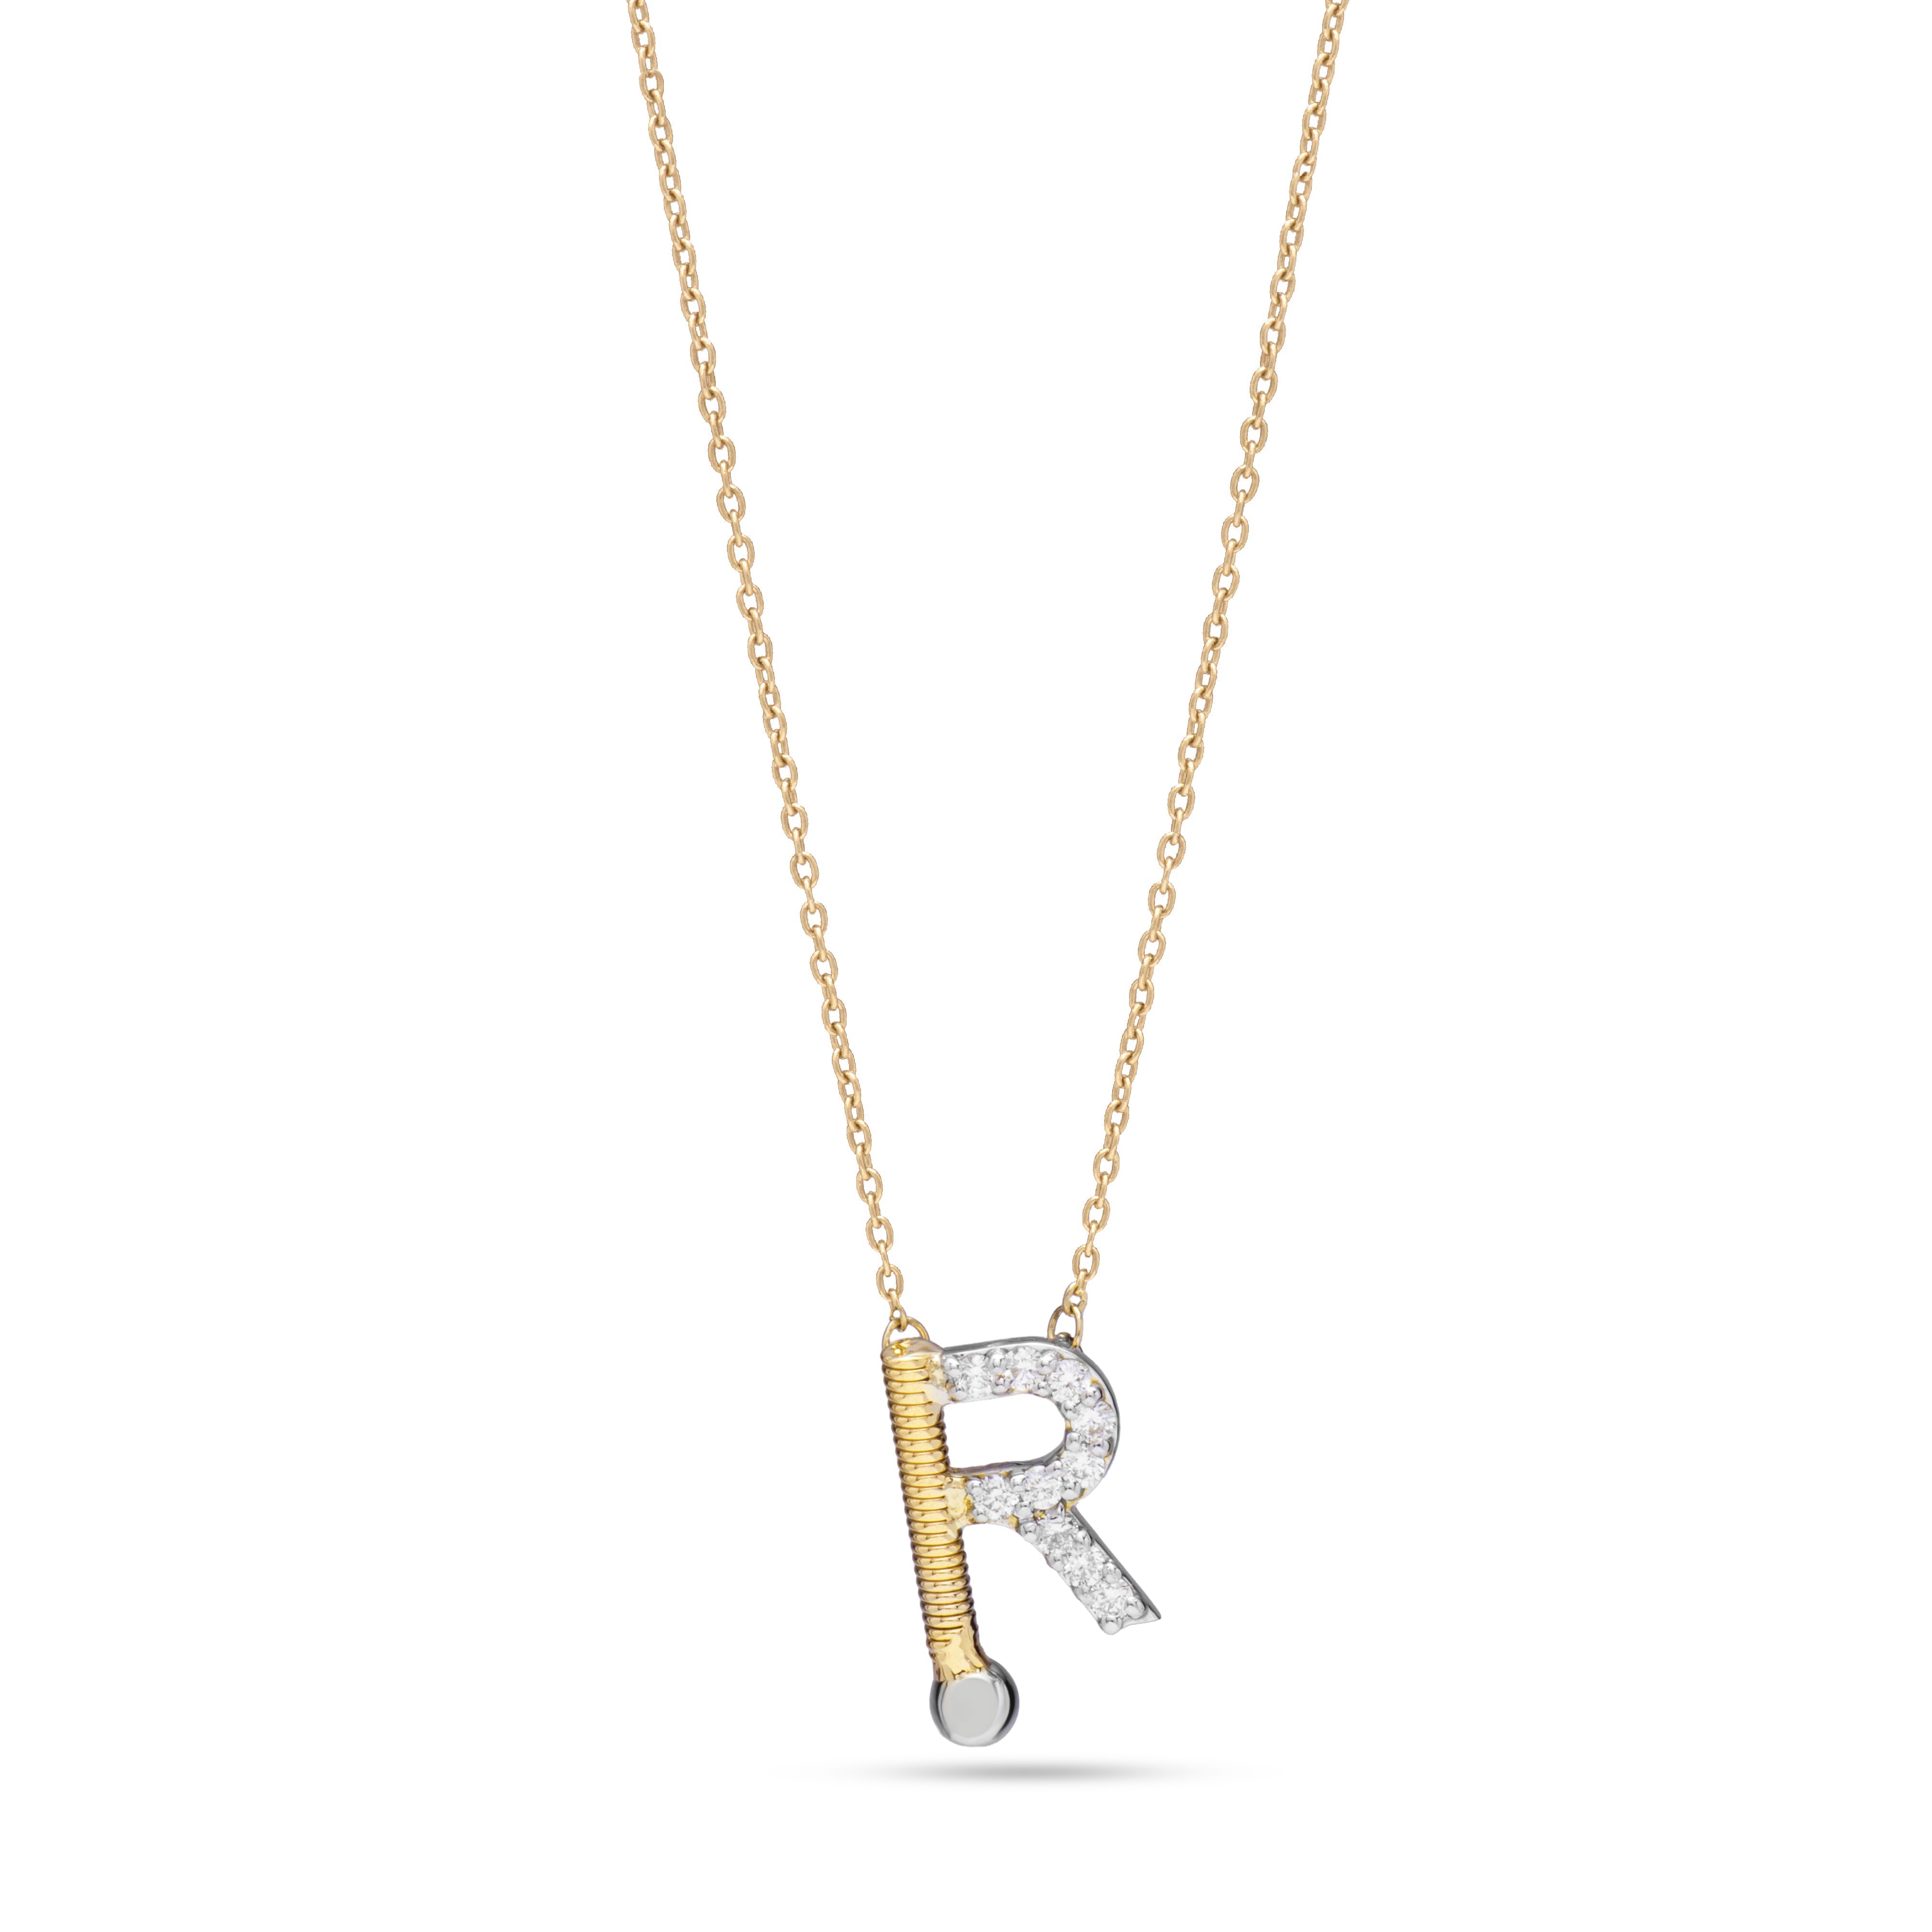 Letter R outstanding Diamond necklace in Yellow 18K Gold - S-P60